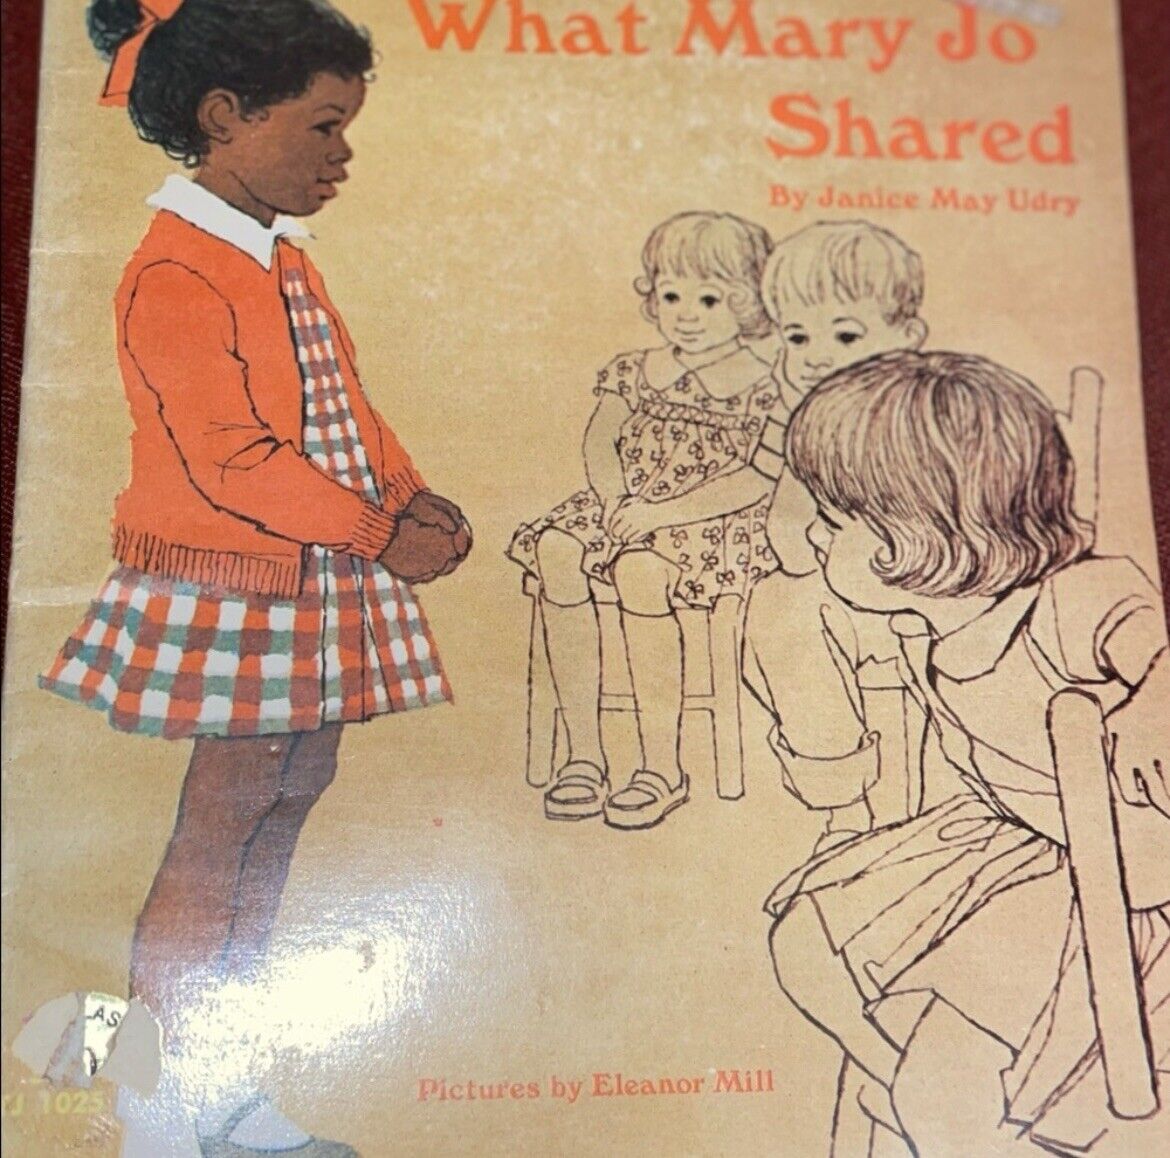 Vintage Collectible Children’s Book “What Mary Jo Knows”